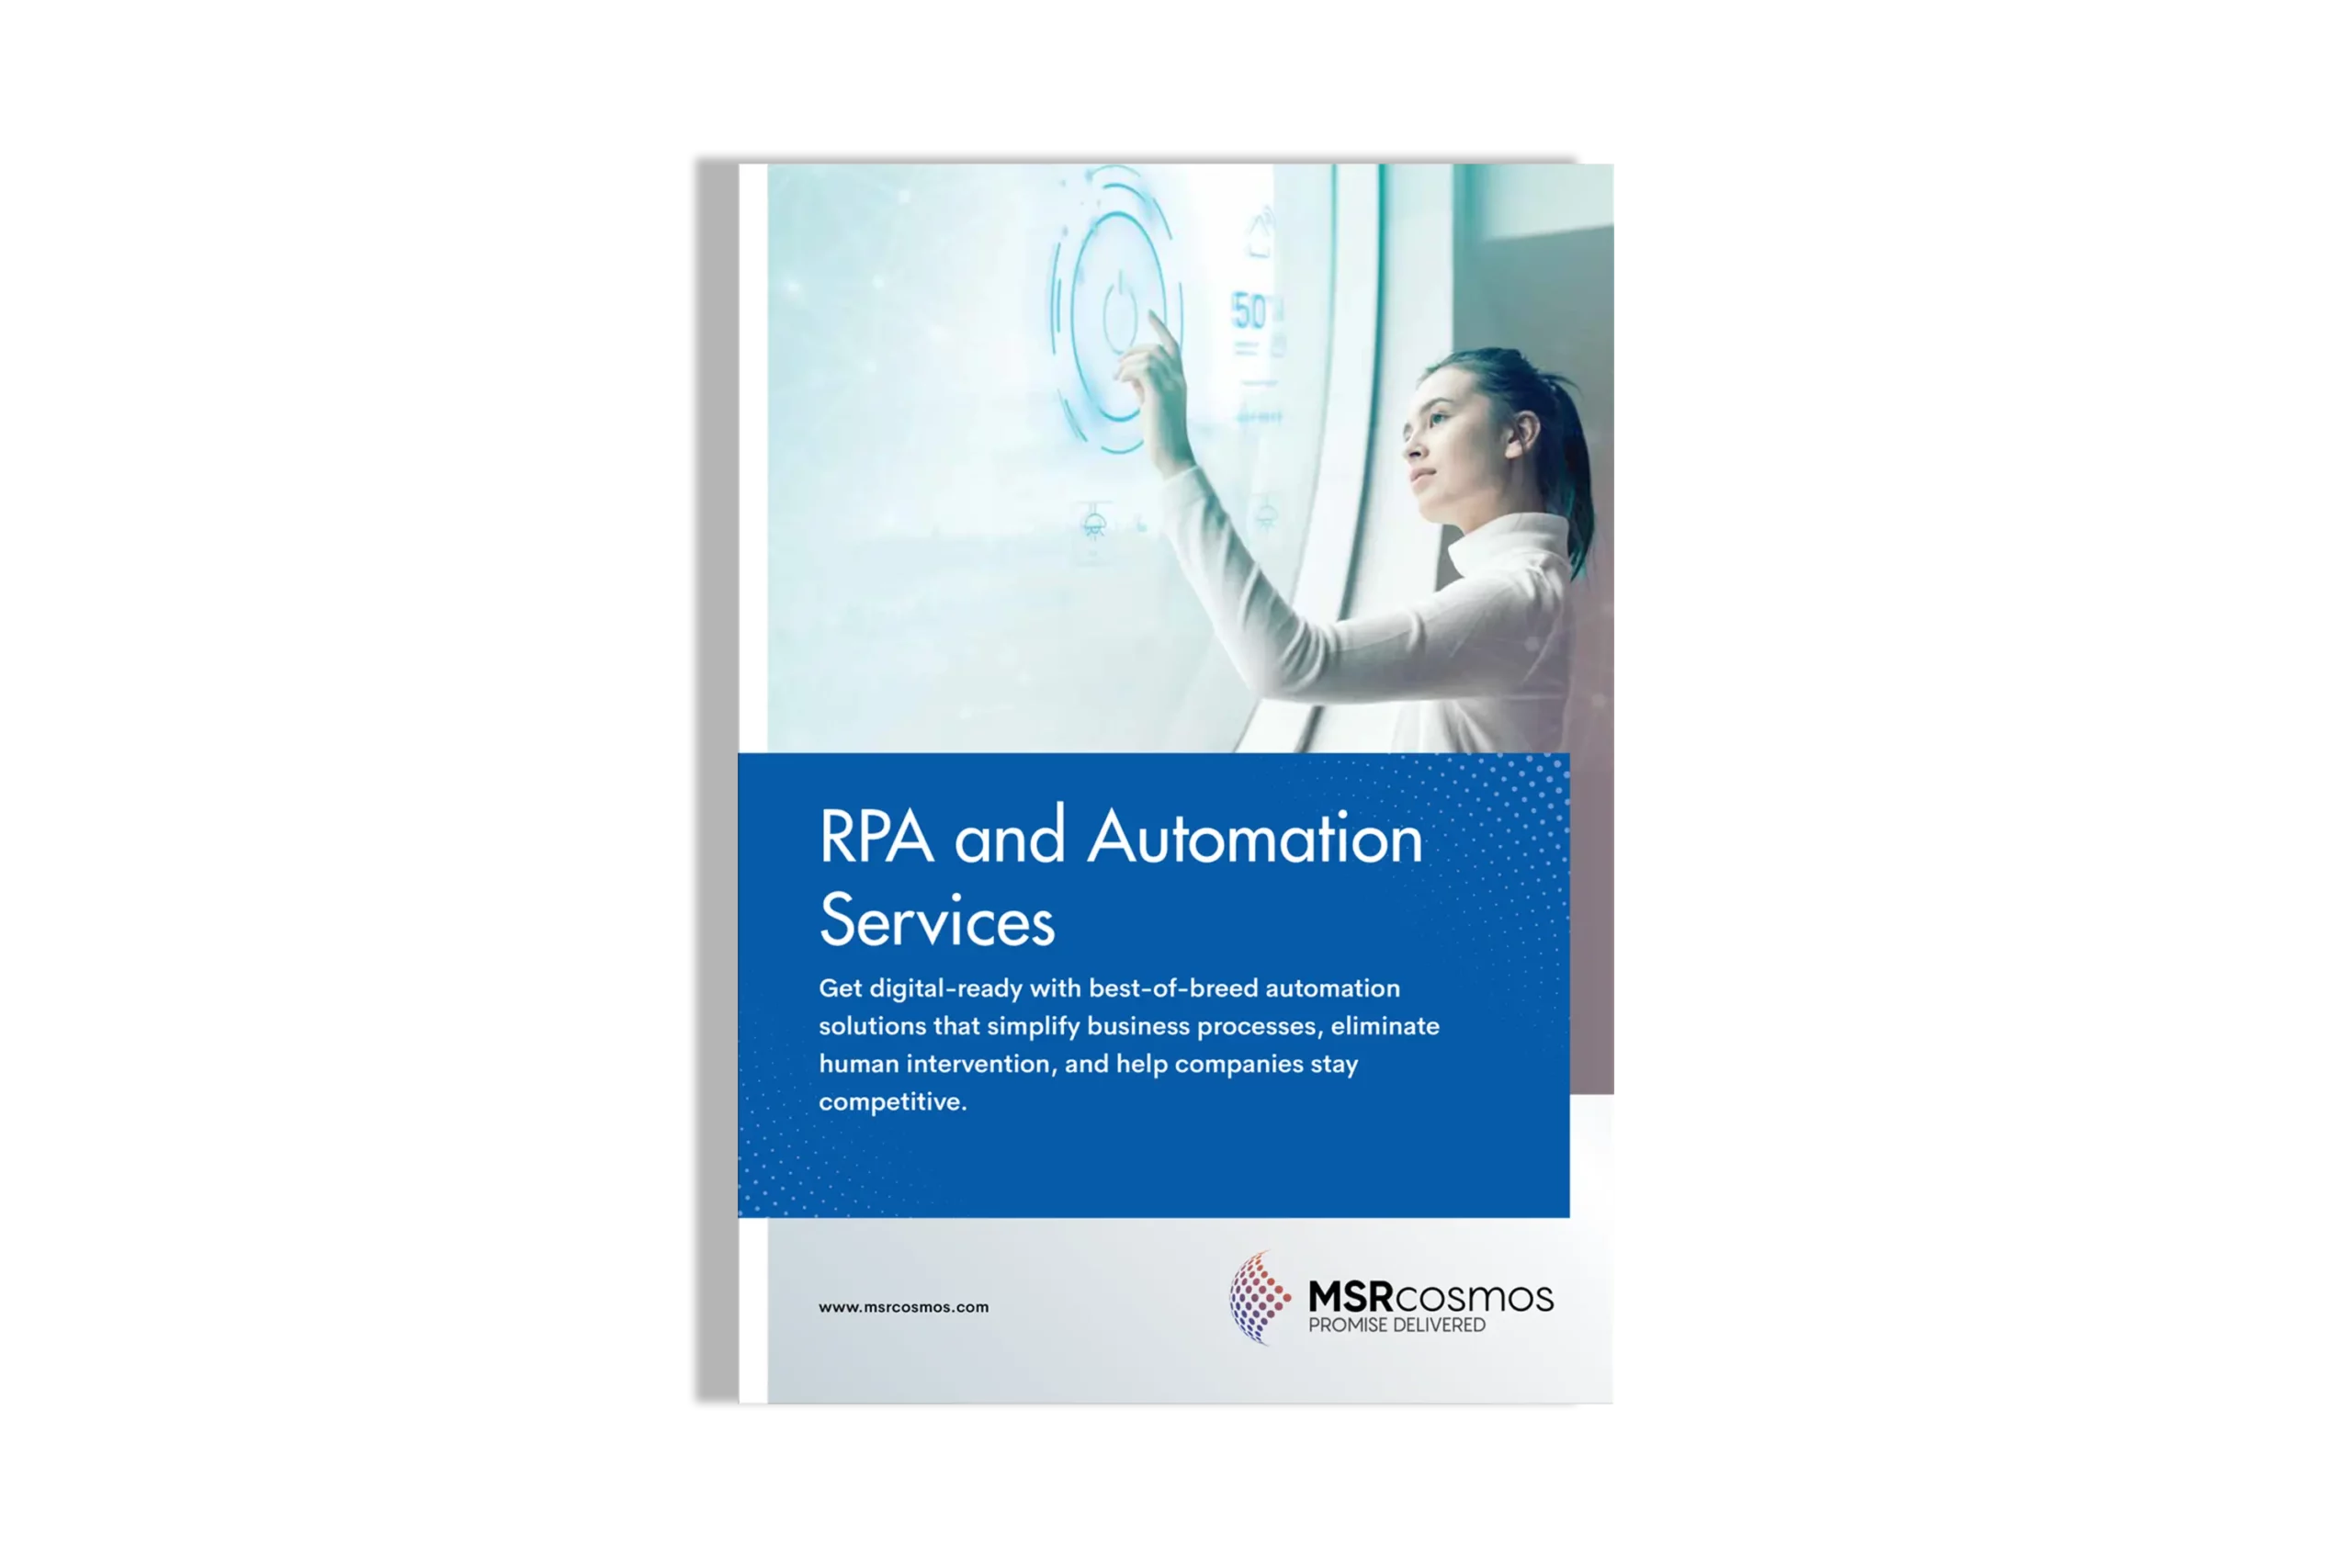 RPA and Automation Solutions & Services Brochure